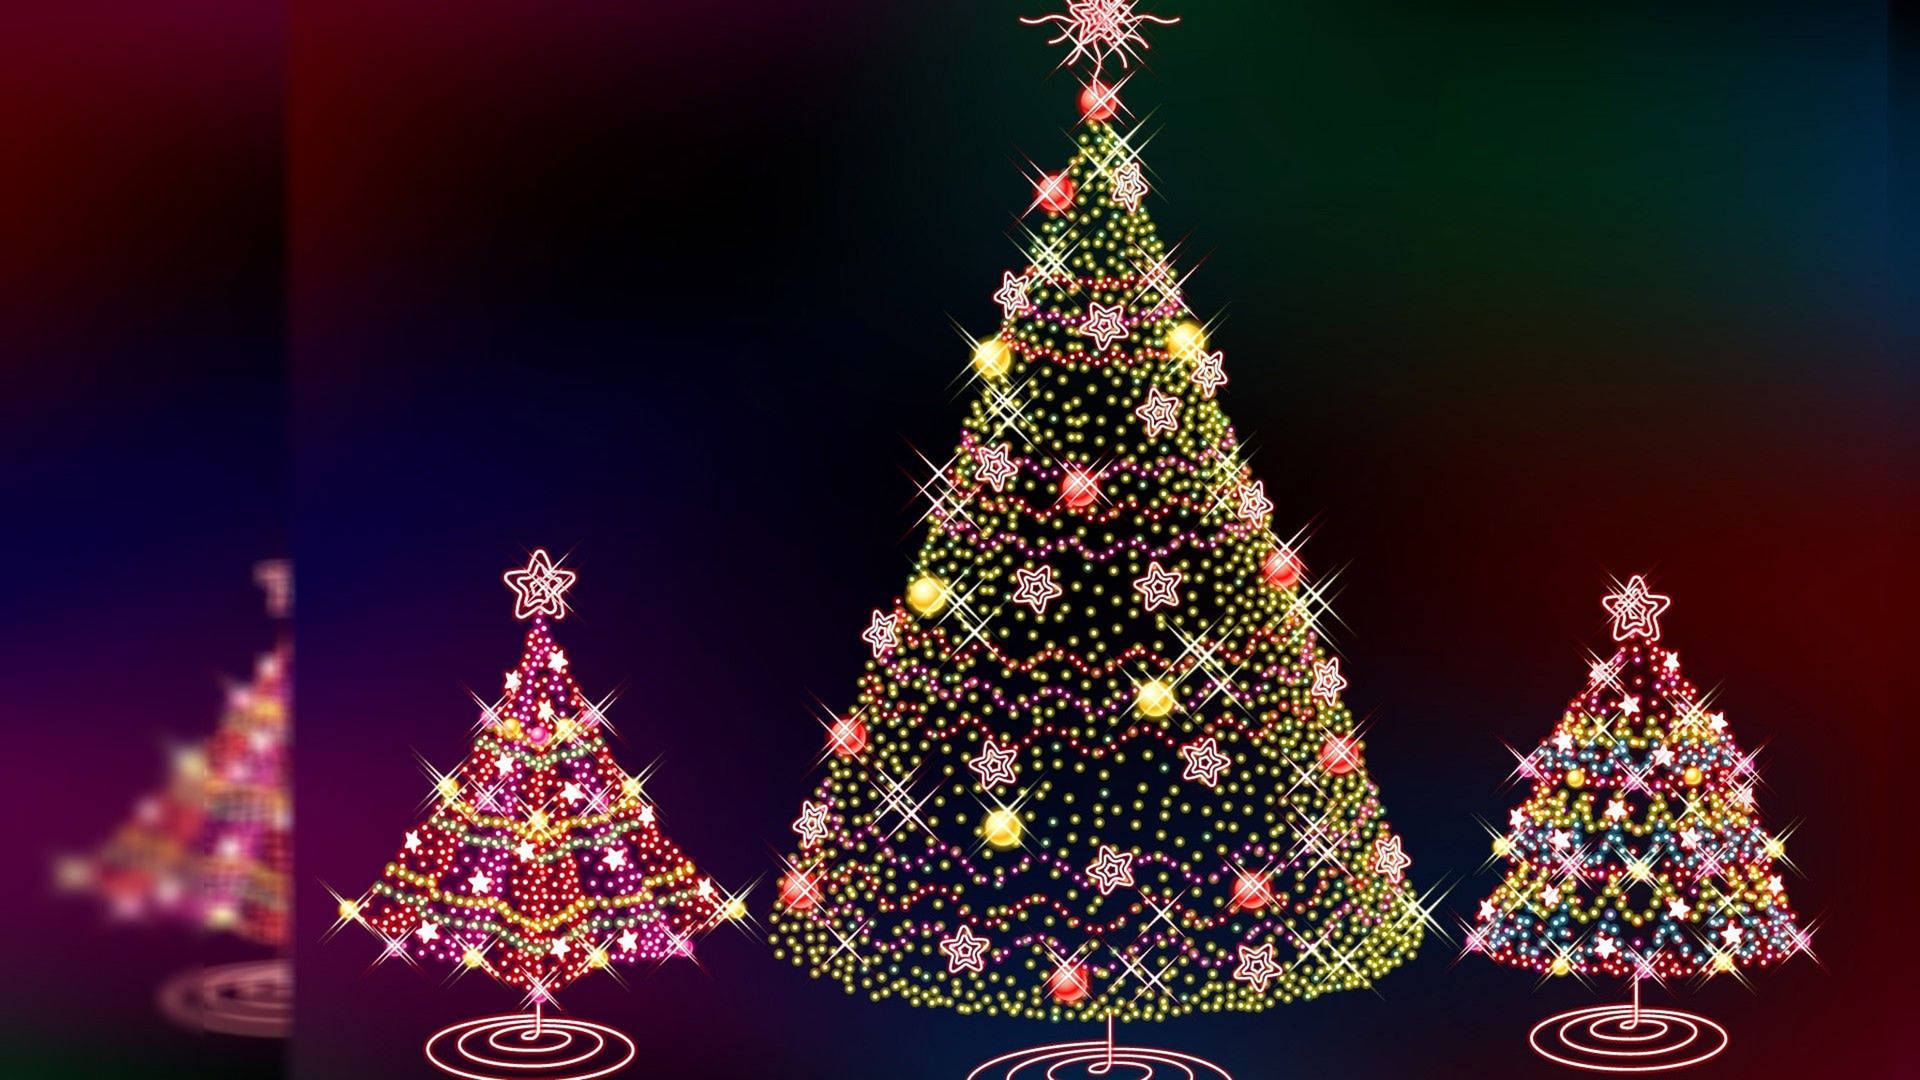 Christmas Desktop Colorful Trees Background